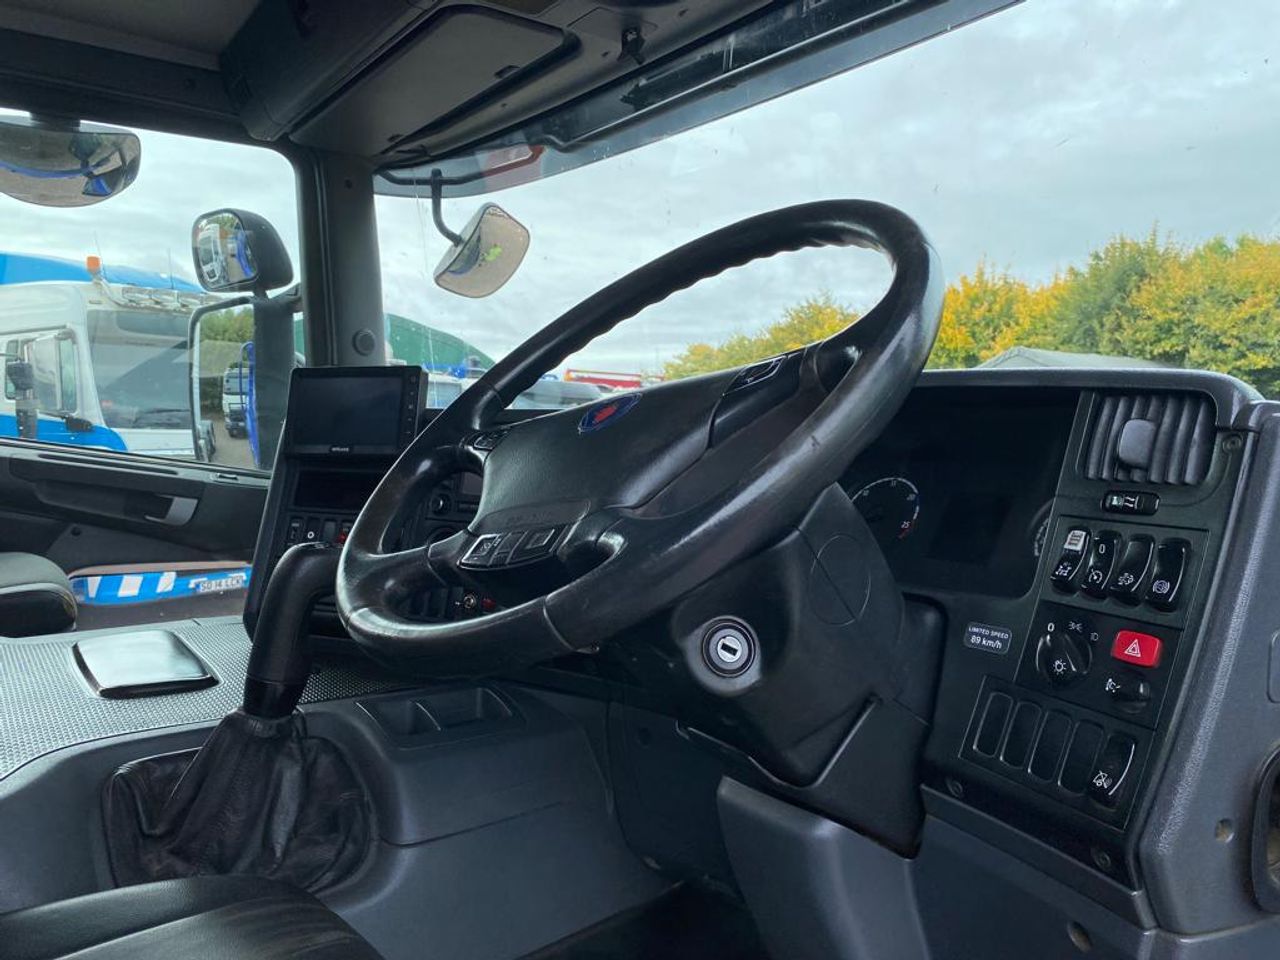 Ready to go Scania P410, Tipper, 410, 32 Tonne, Day Cab, Manual, Cab Sunvisor With LED Lights, Autolube, Automatic Tailgate, Multi Function Steering Wheel, Reversing Camera, , -, - | for sale at MV Commercial, the UKs leading Truck, Trailers and Van supplier. (EU17UZJ 91300)